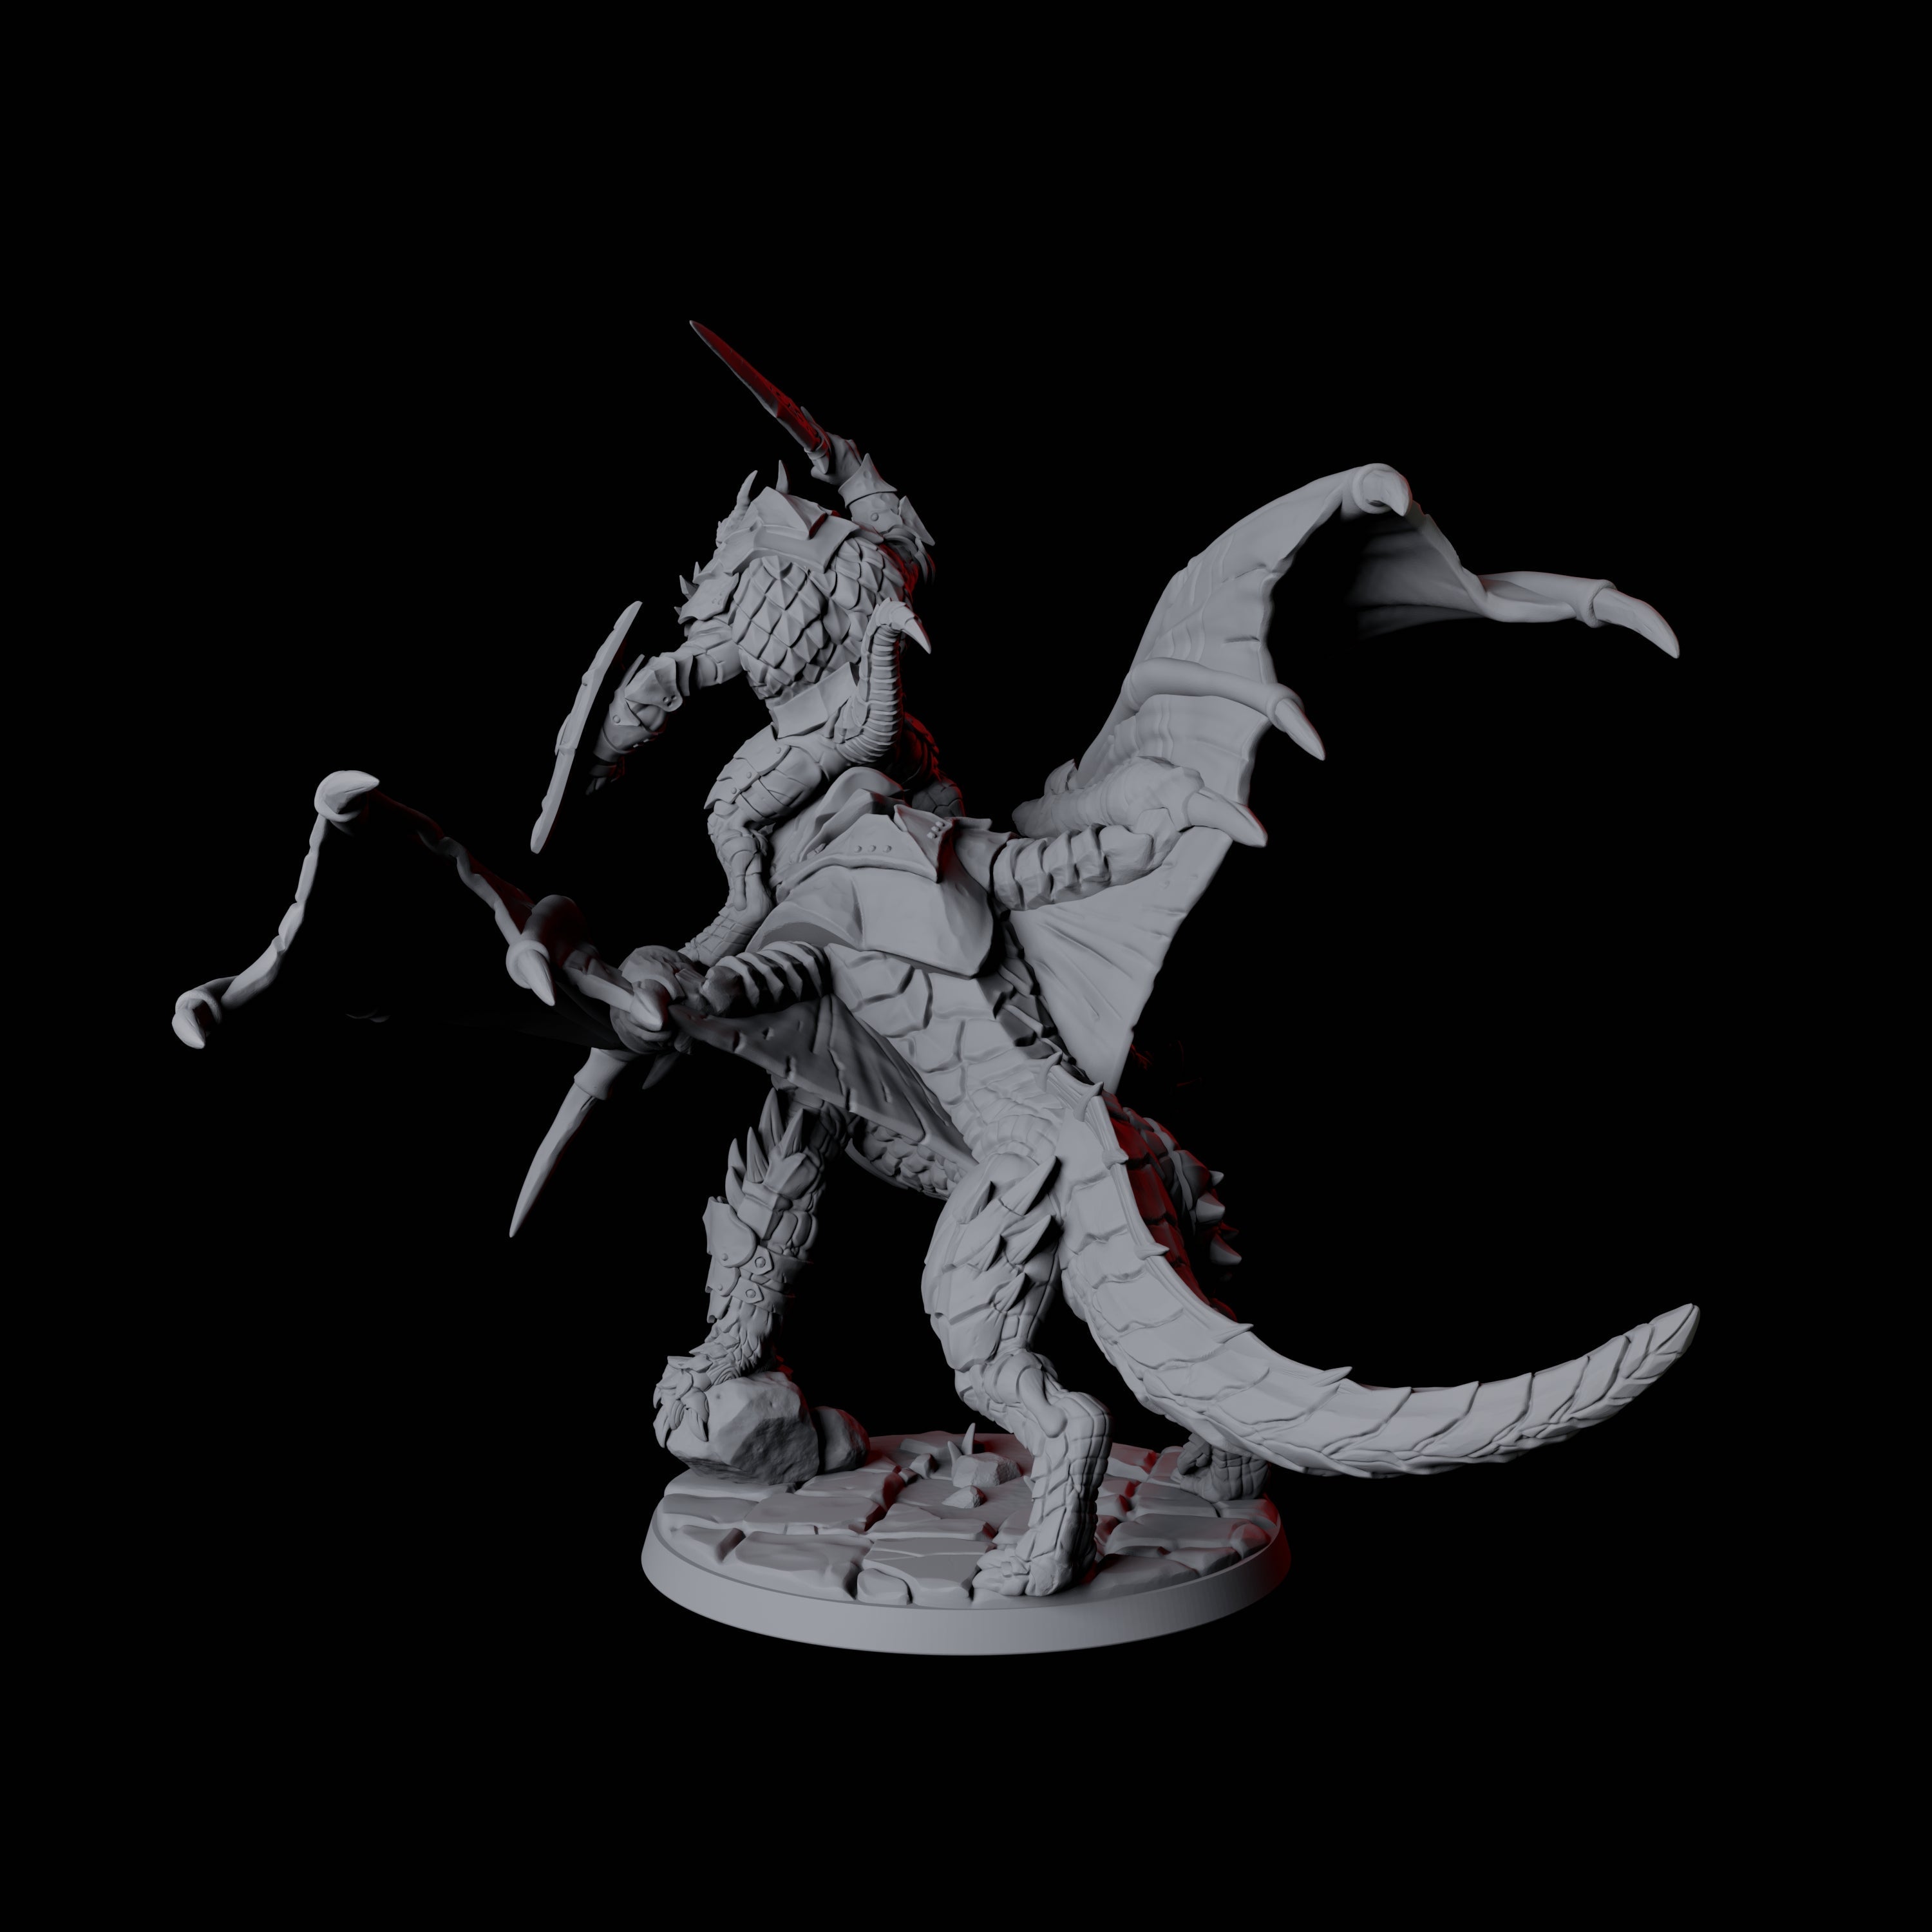 Valiant Dragonborn Warriors Riding Dragon B Miniature for Dungeons and Dragons, Pathfinder or other TTRPGs